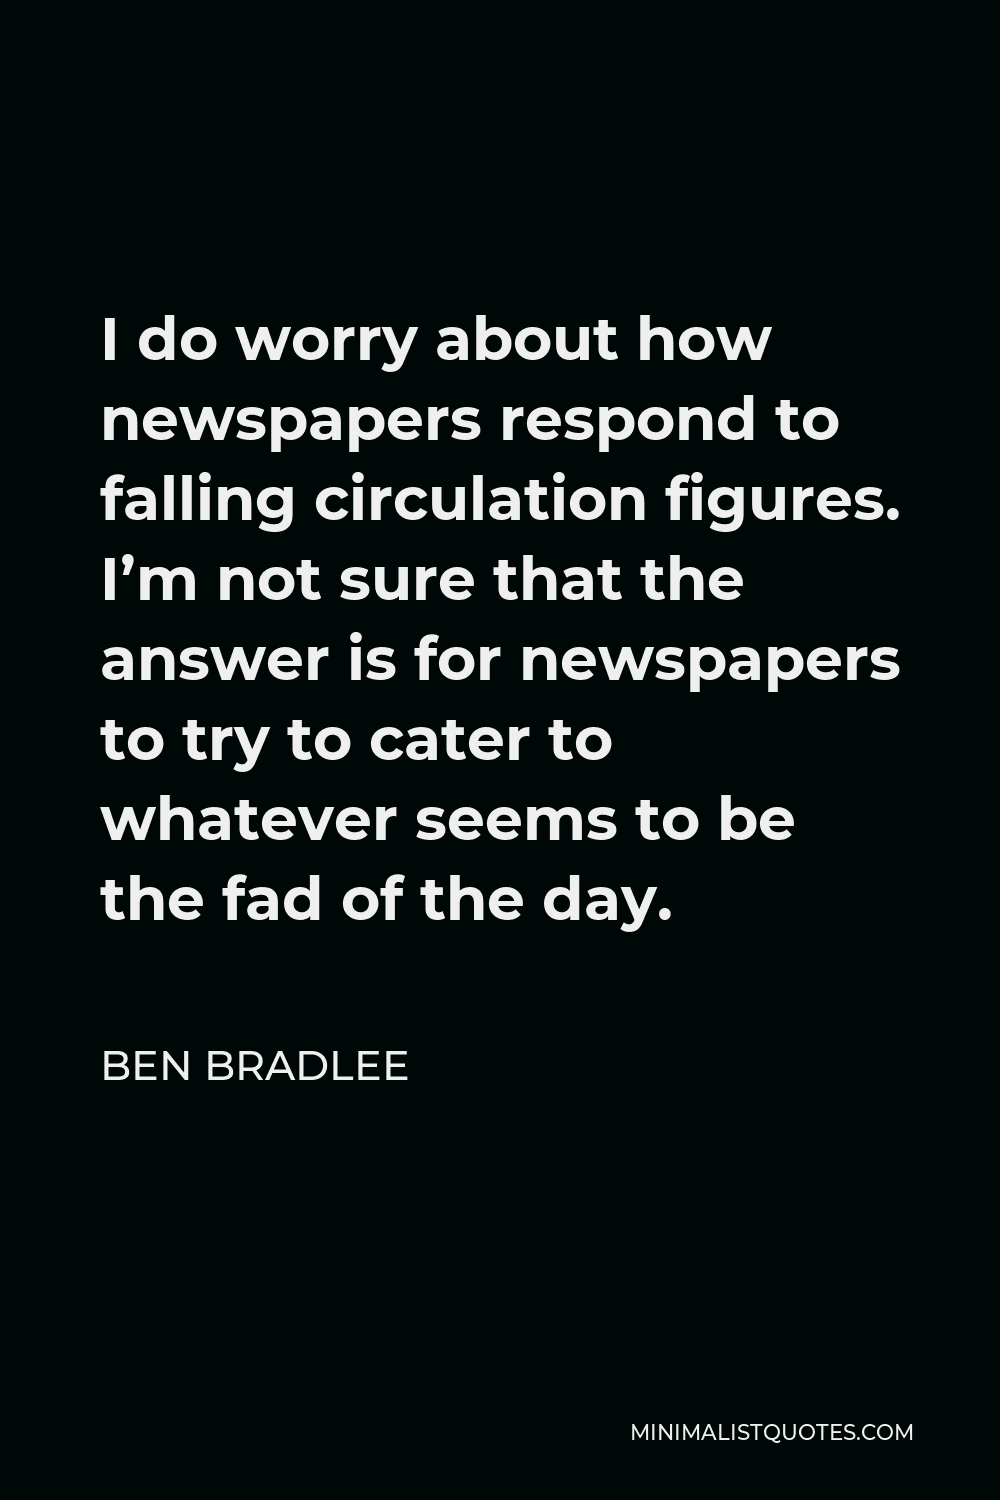 Ben Bradlee Quote - I do worry about how newspapers respond to falling circulation figures. I’m not sure that the answer is for newspapers to try to cater to whatever seems to be the fad of the day.